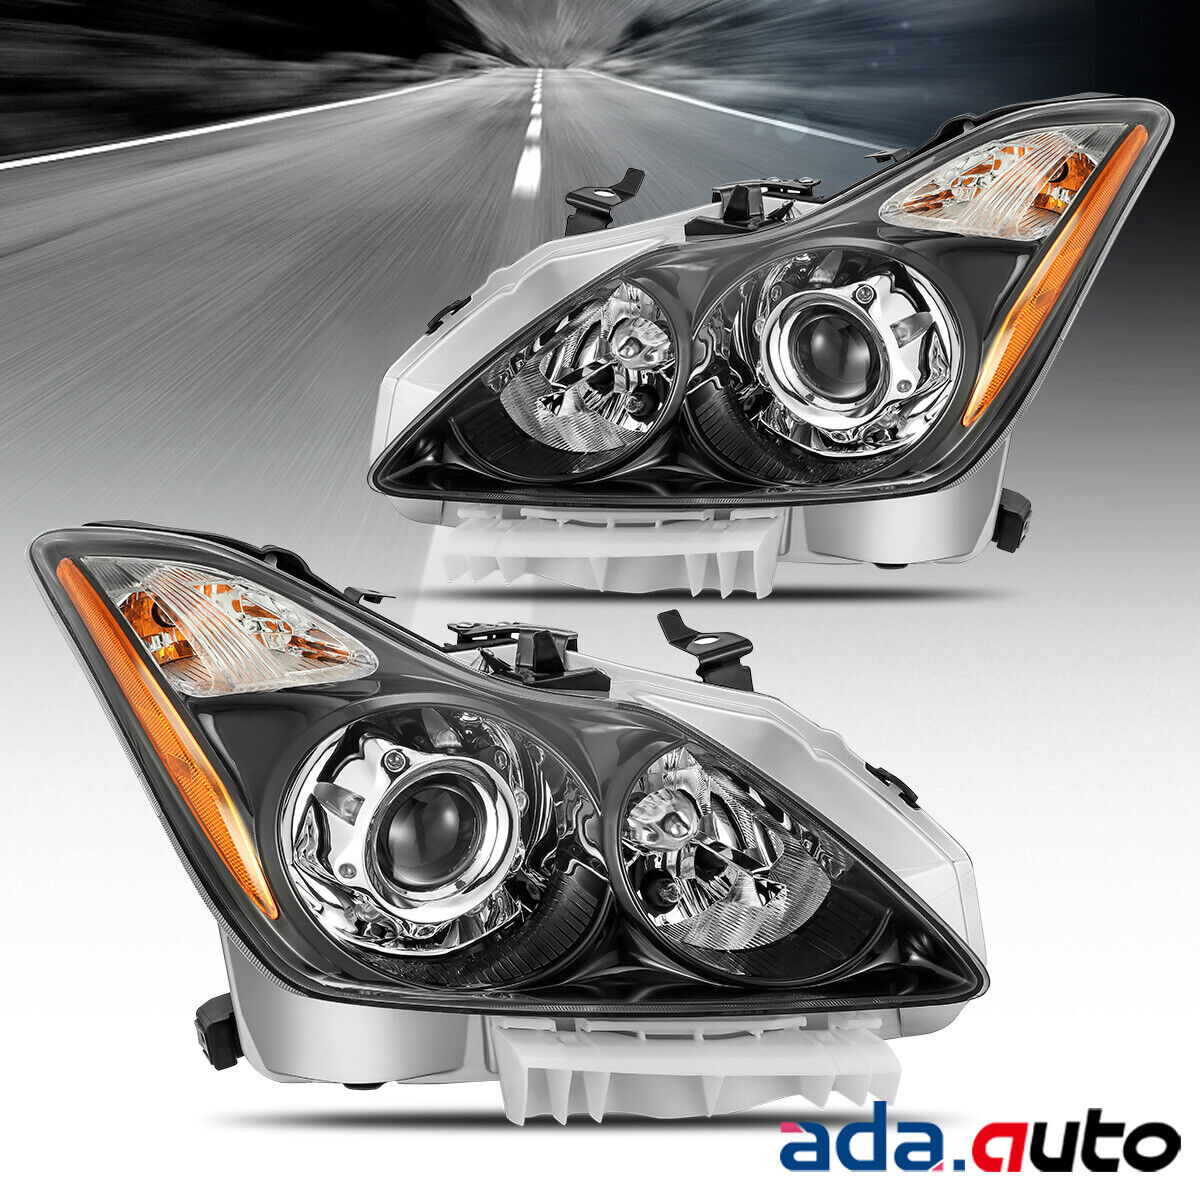 [Polished Black]For 2008-2015 Infiniti G37/Q60 Coupe Factory Style Headlights